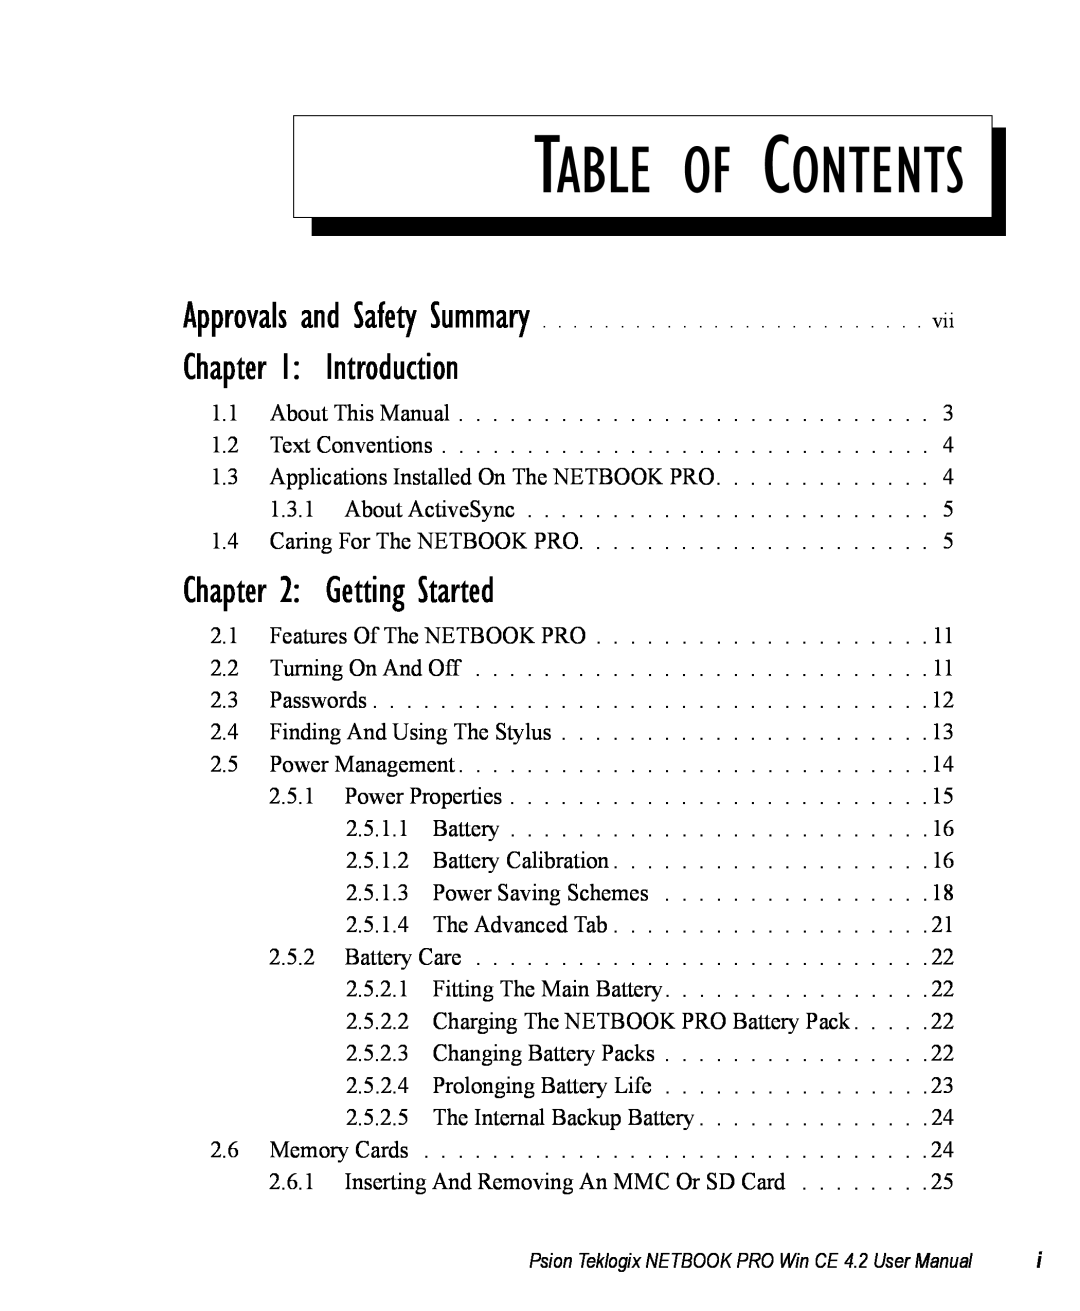 Psion Teklogix Win CE 4.2 user manual Table Of Contents, Introduction, Getting Started 